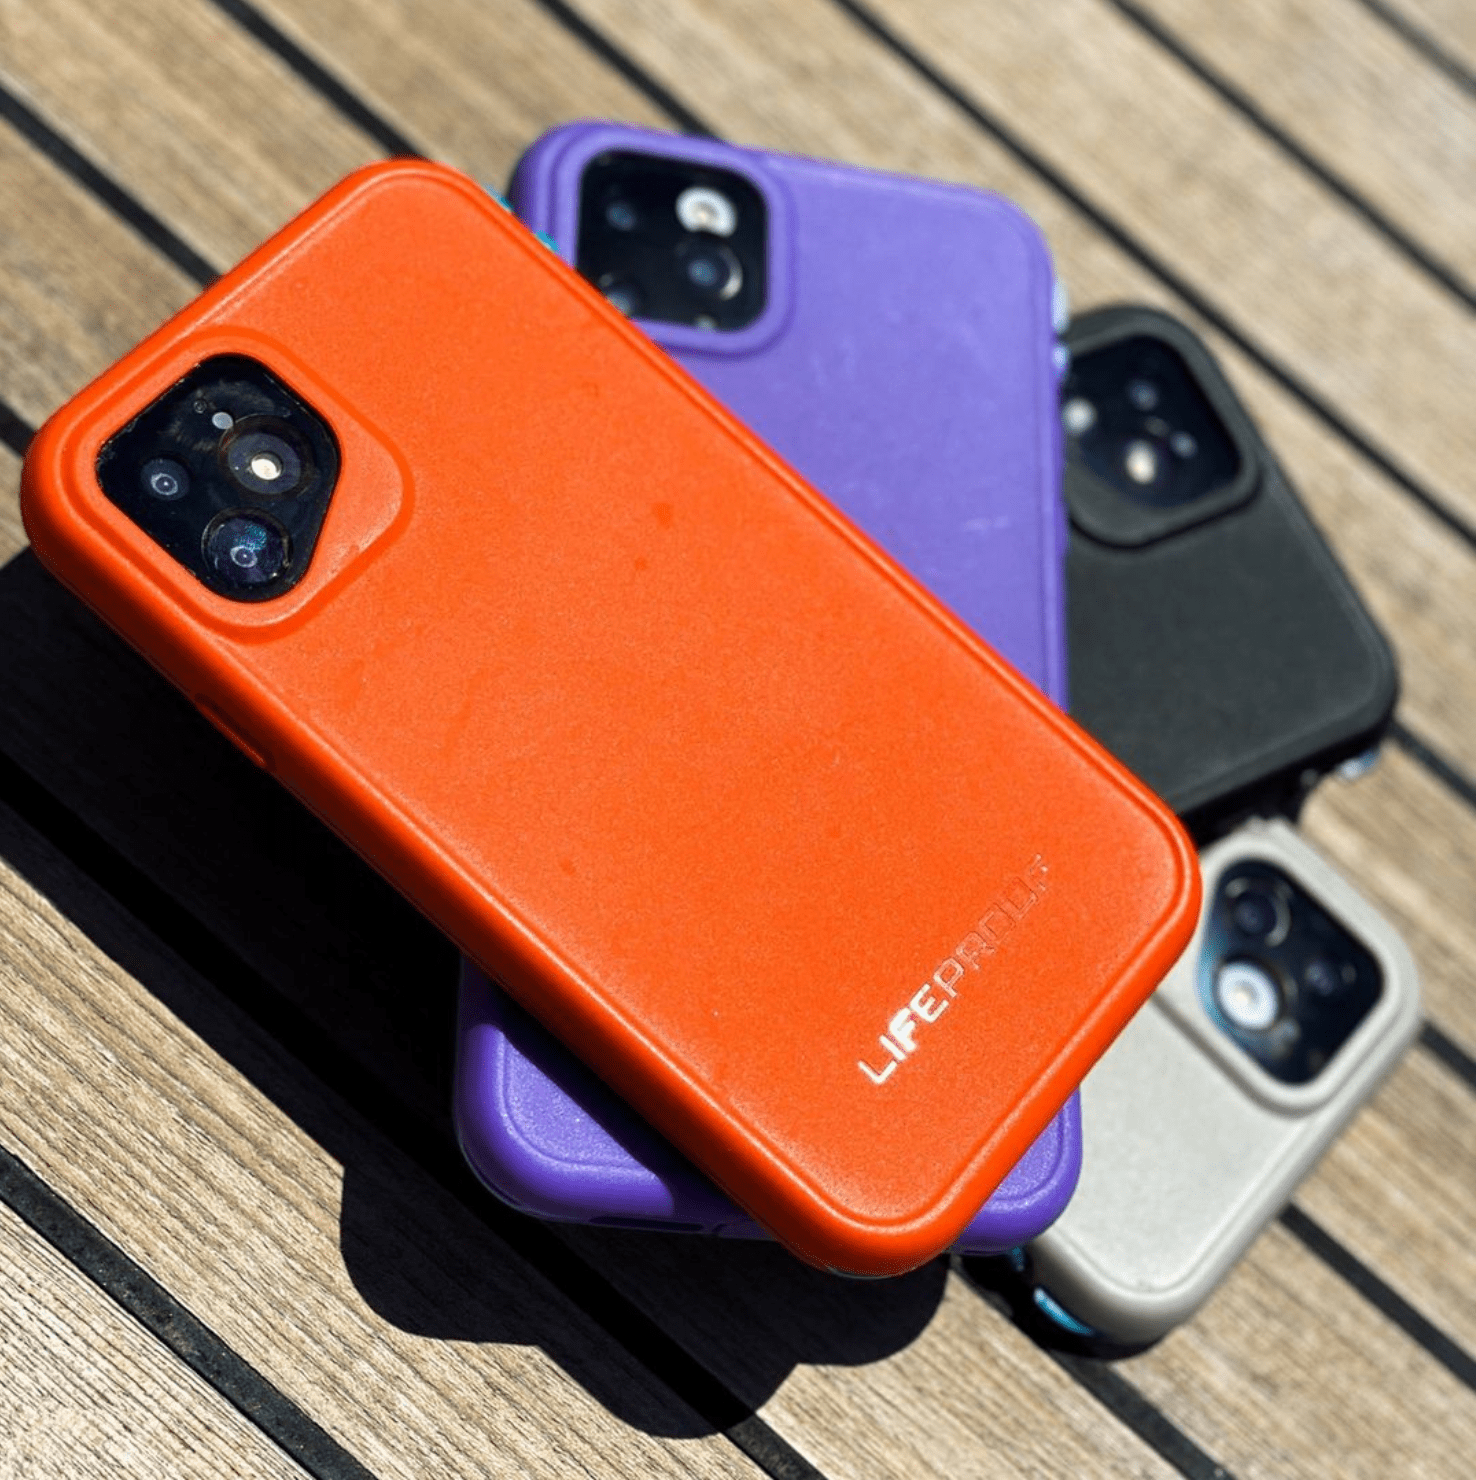 heavy-duty phone cases - LifeProof FRE